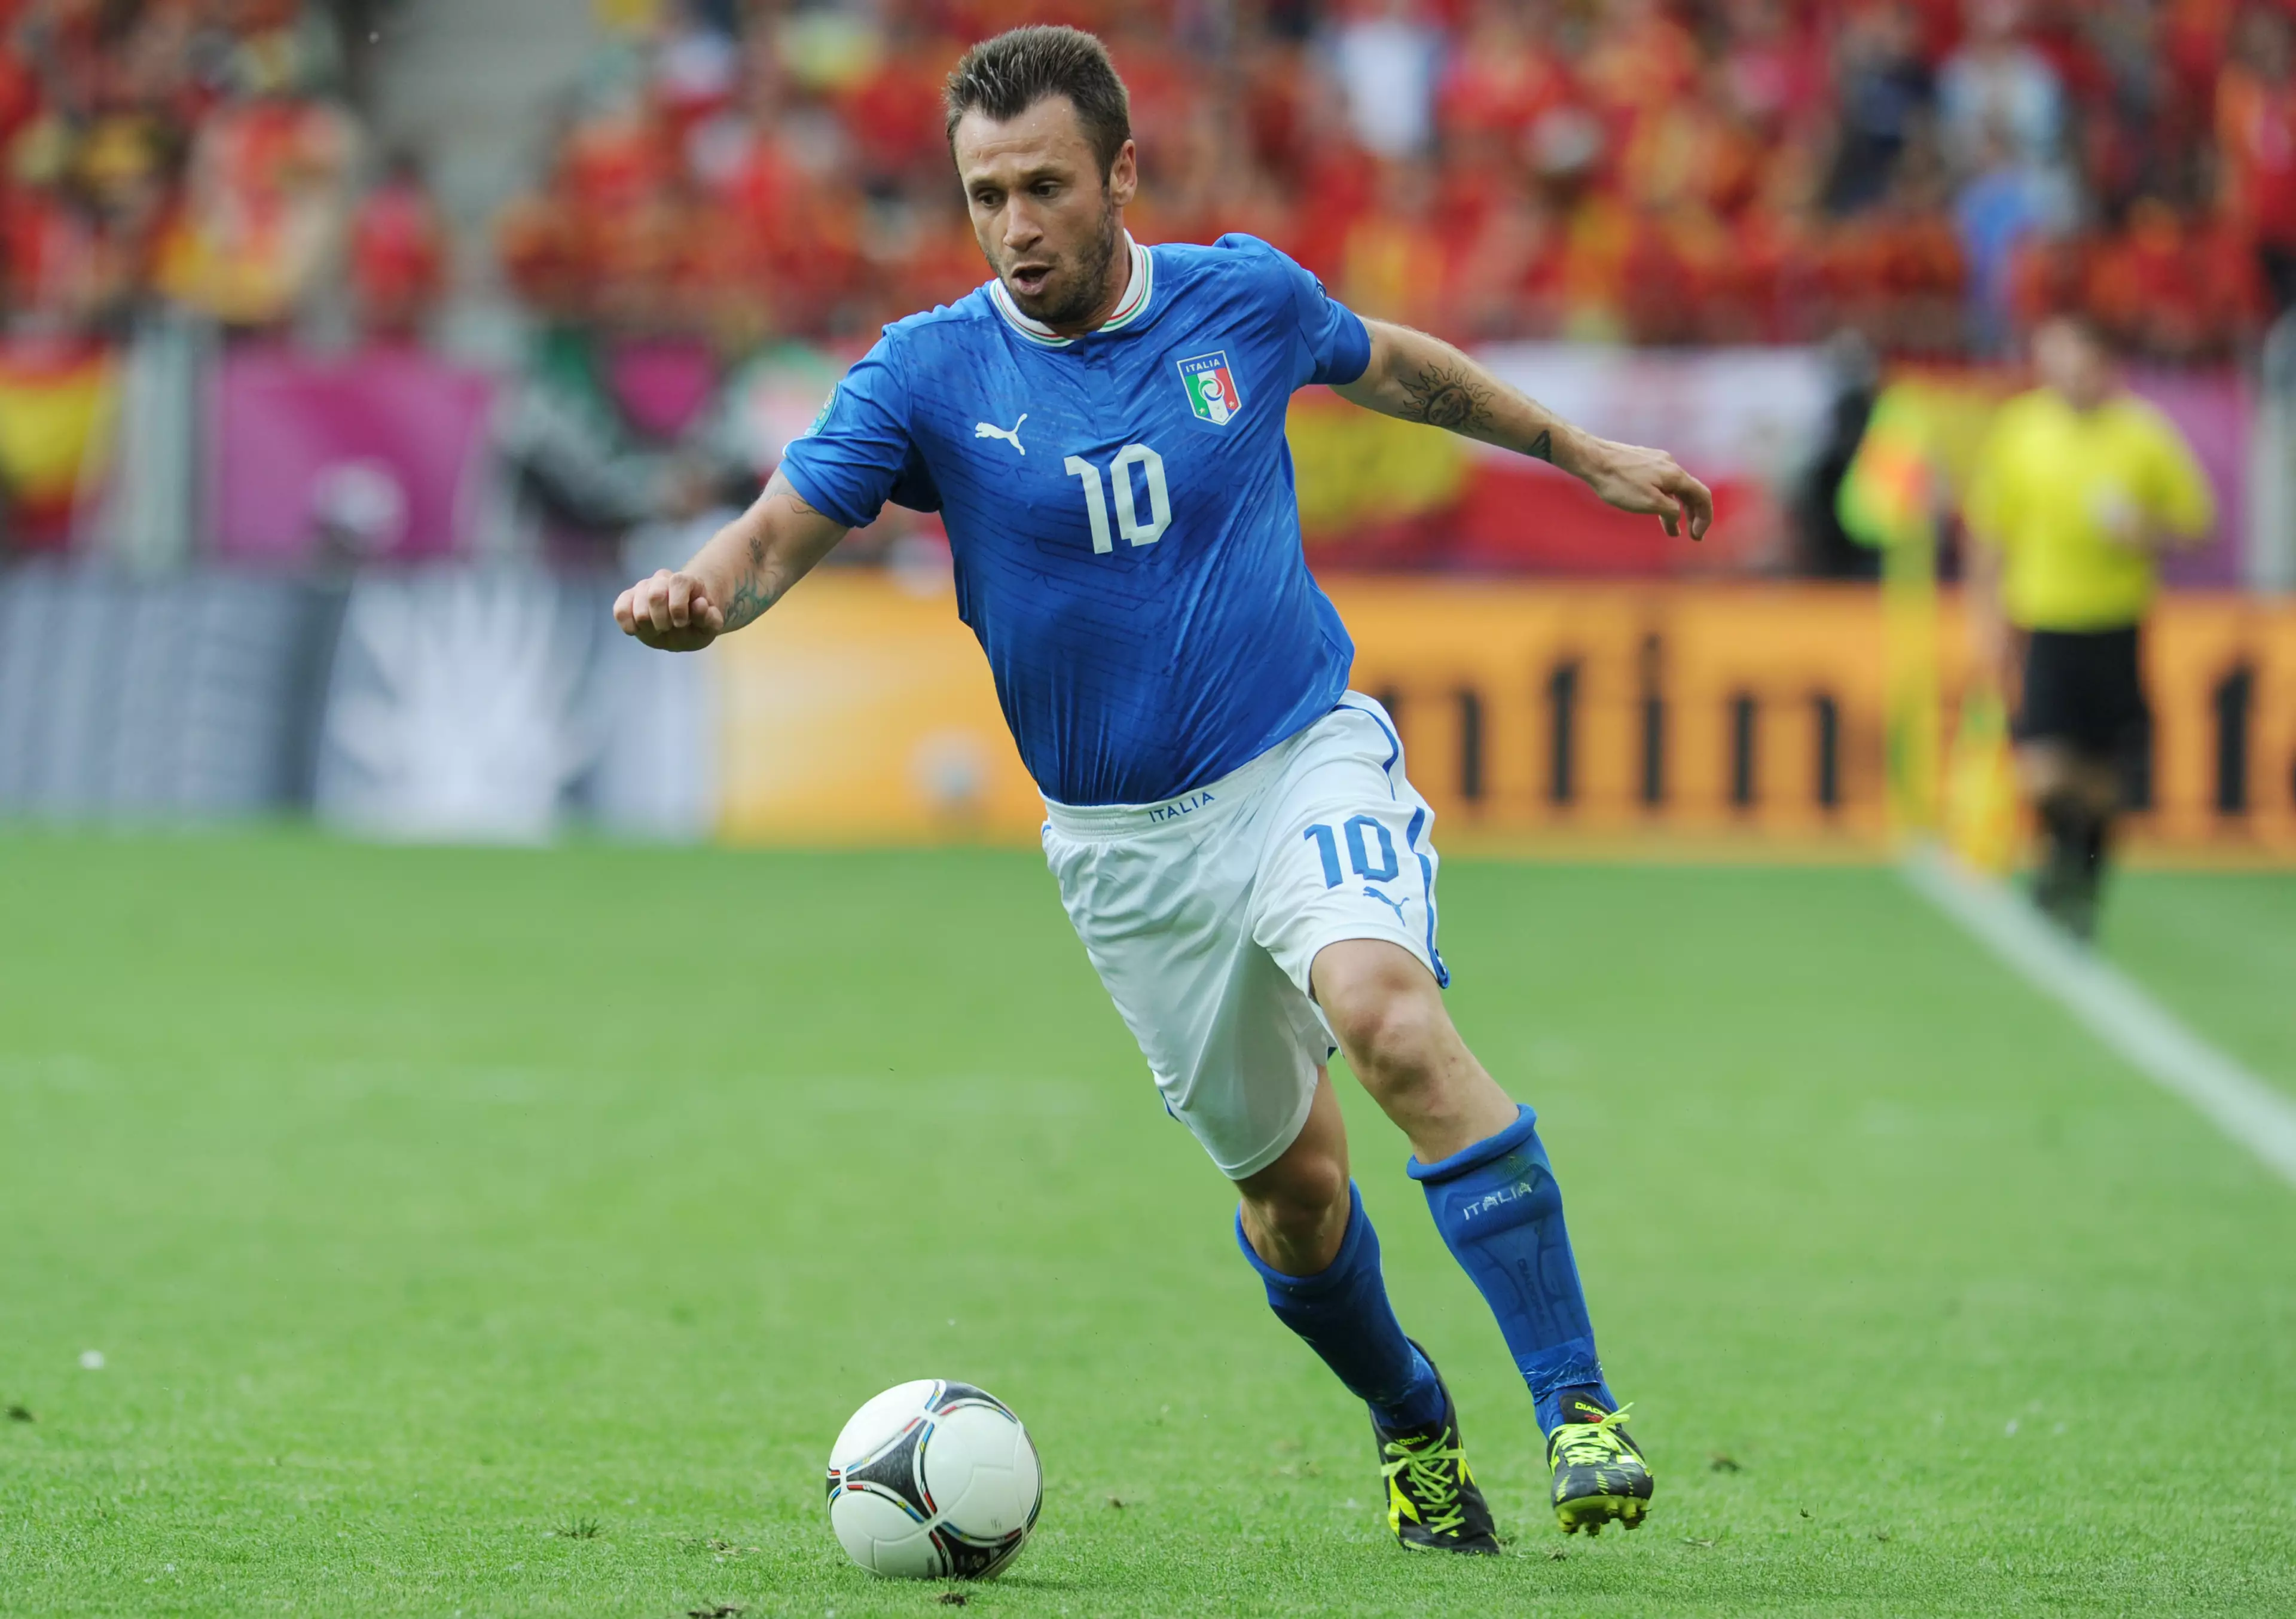 Cassano played for a total of eight clubs in his 18-year professional career. Image: PA